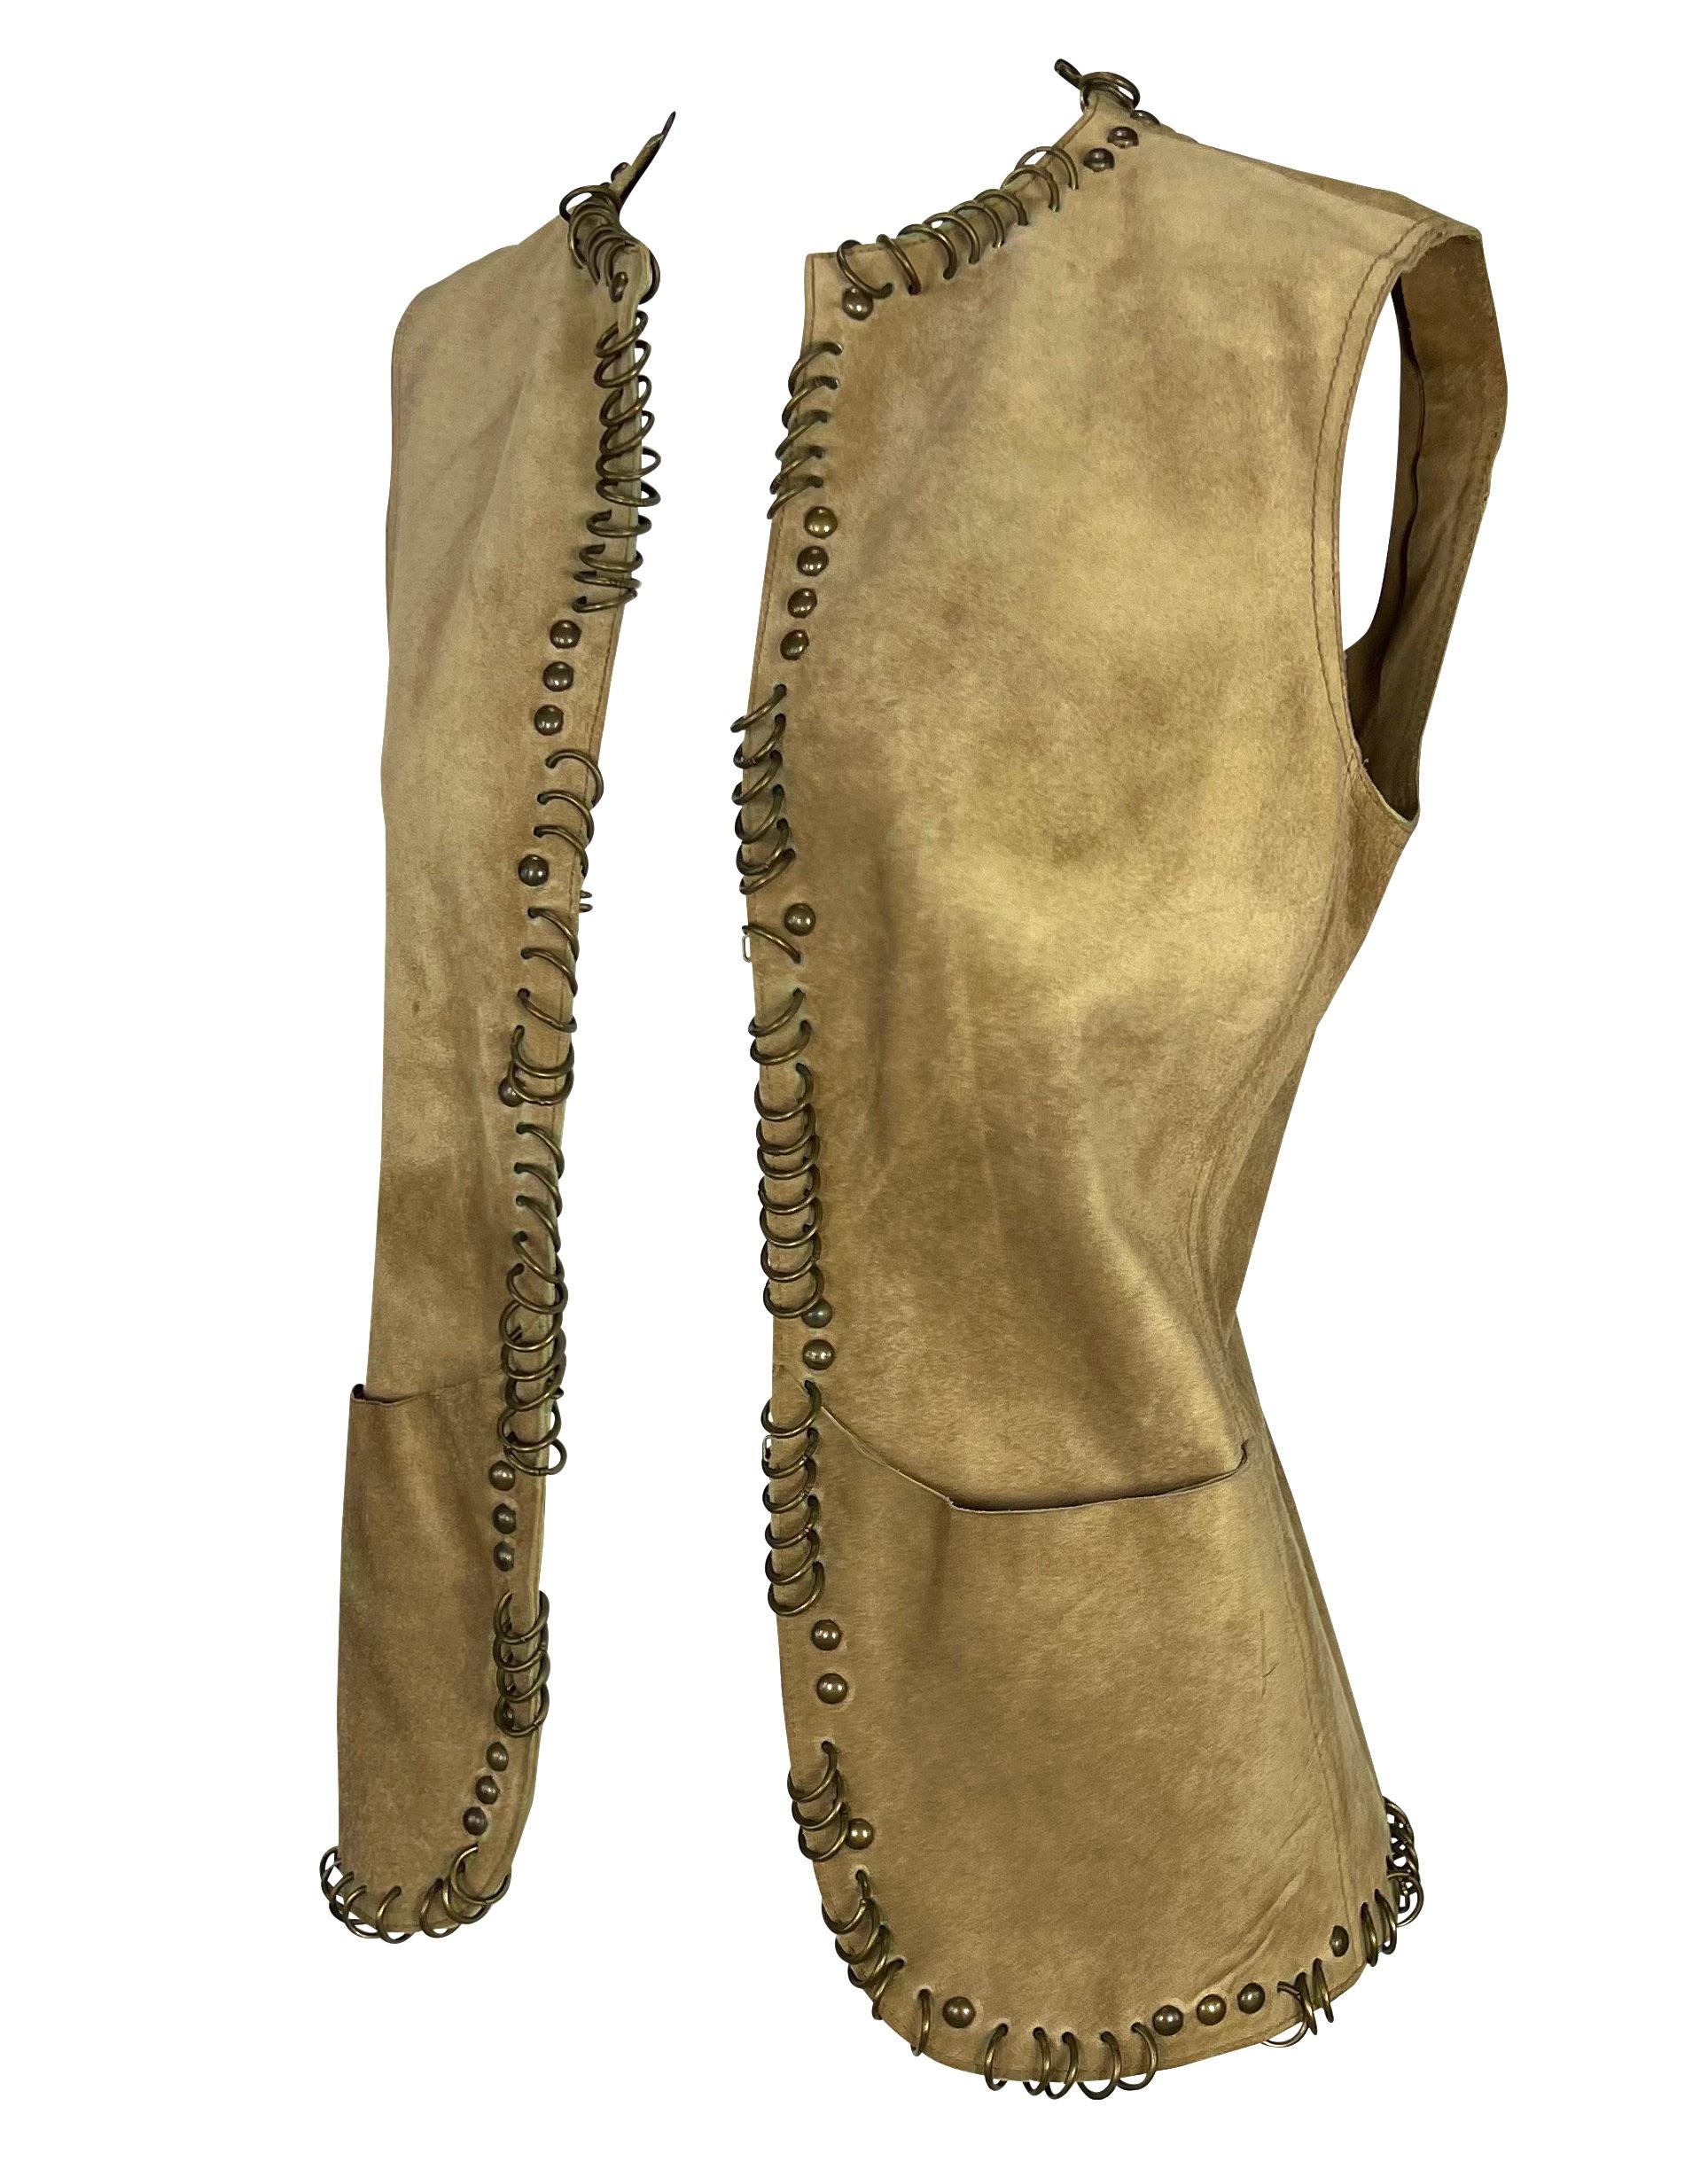 Women's S/S 2002 Yves Saint Laurent by Tom Ford Safari Distressed Suede Studded Vest For Sale